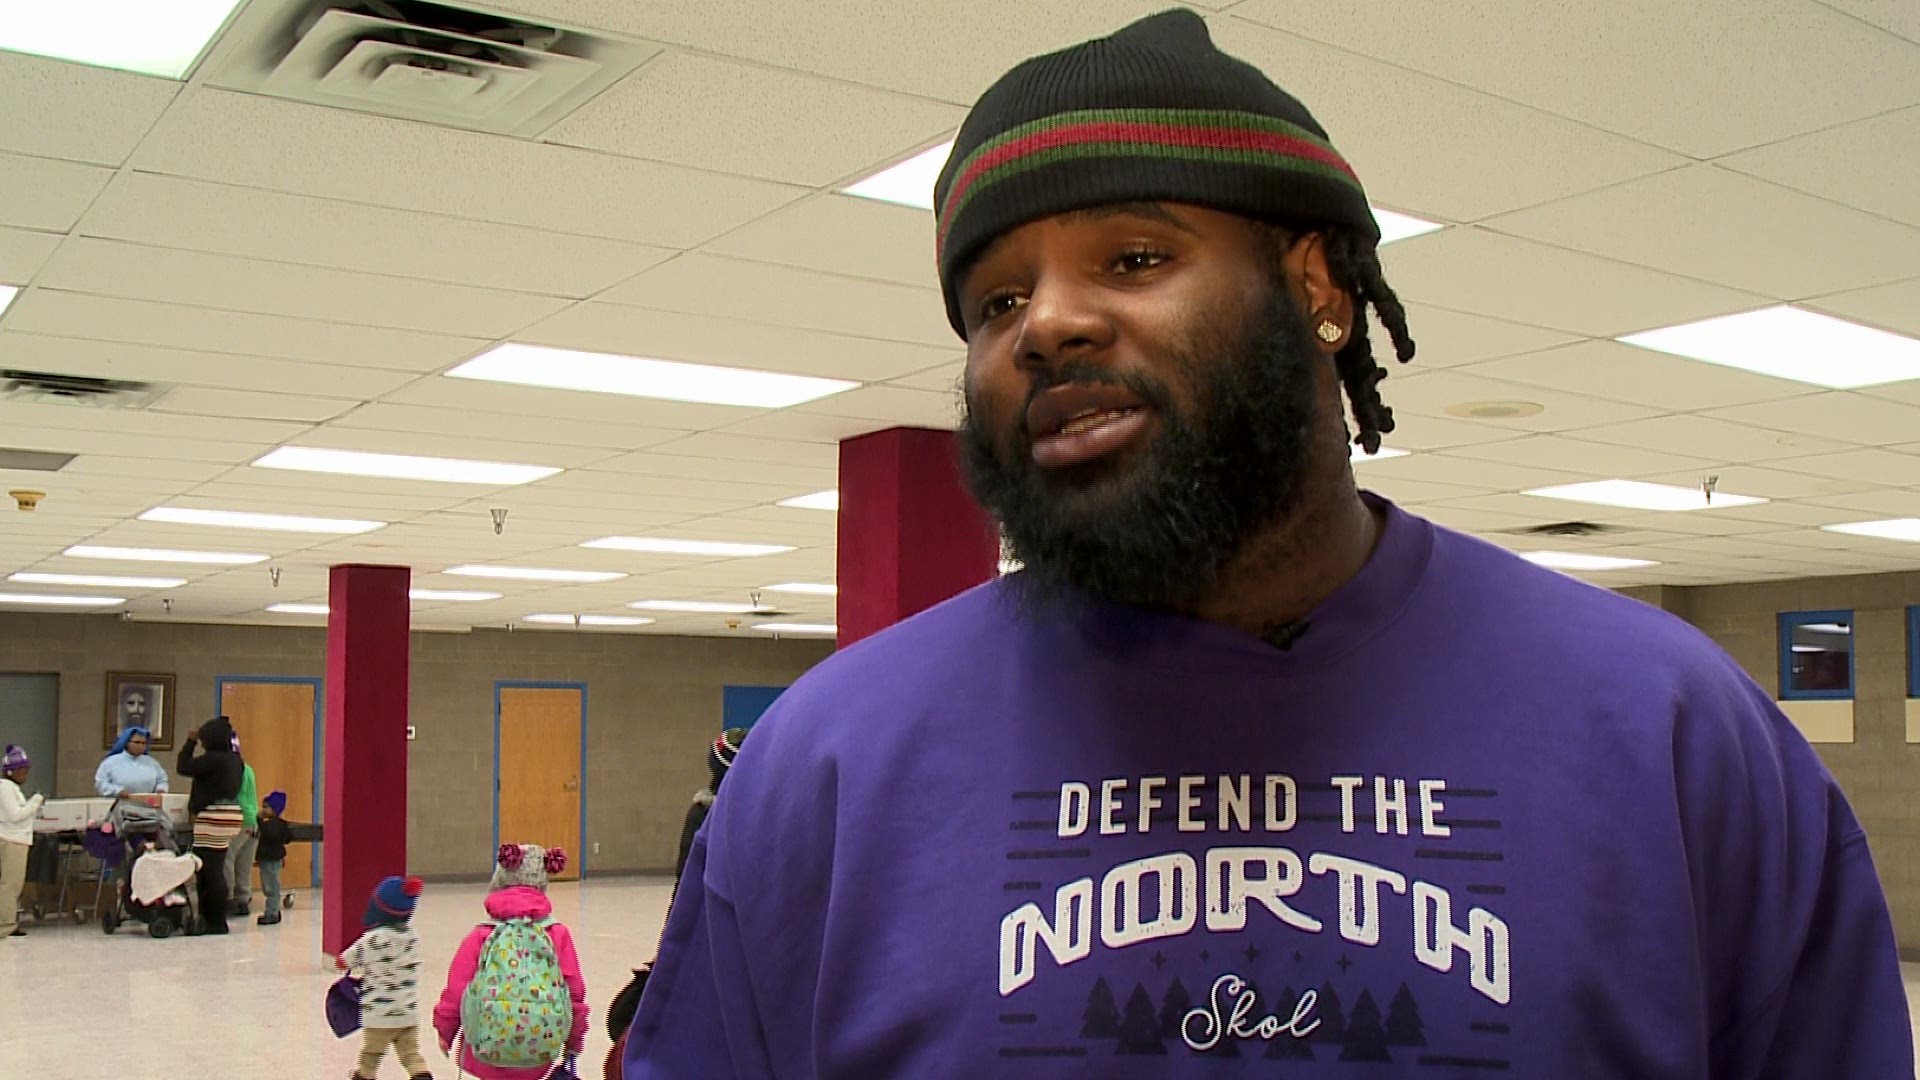 Vikings' Dalvin Cook and Sheldon Richardson gave warm clothes and items away to families in need at Mary's Place in Minneapolis.